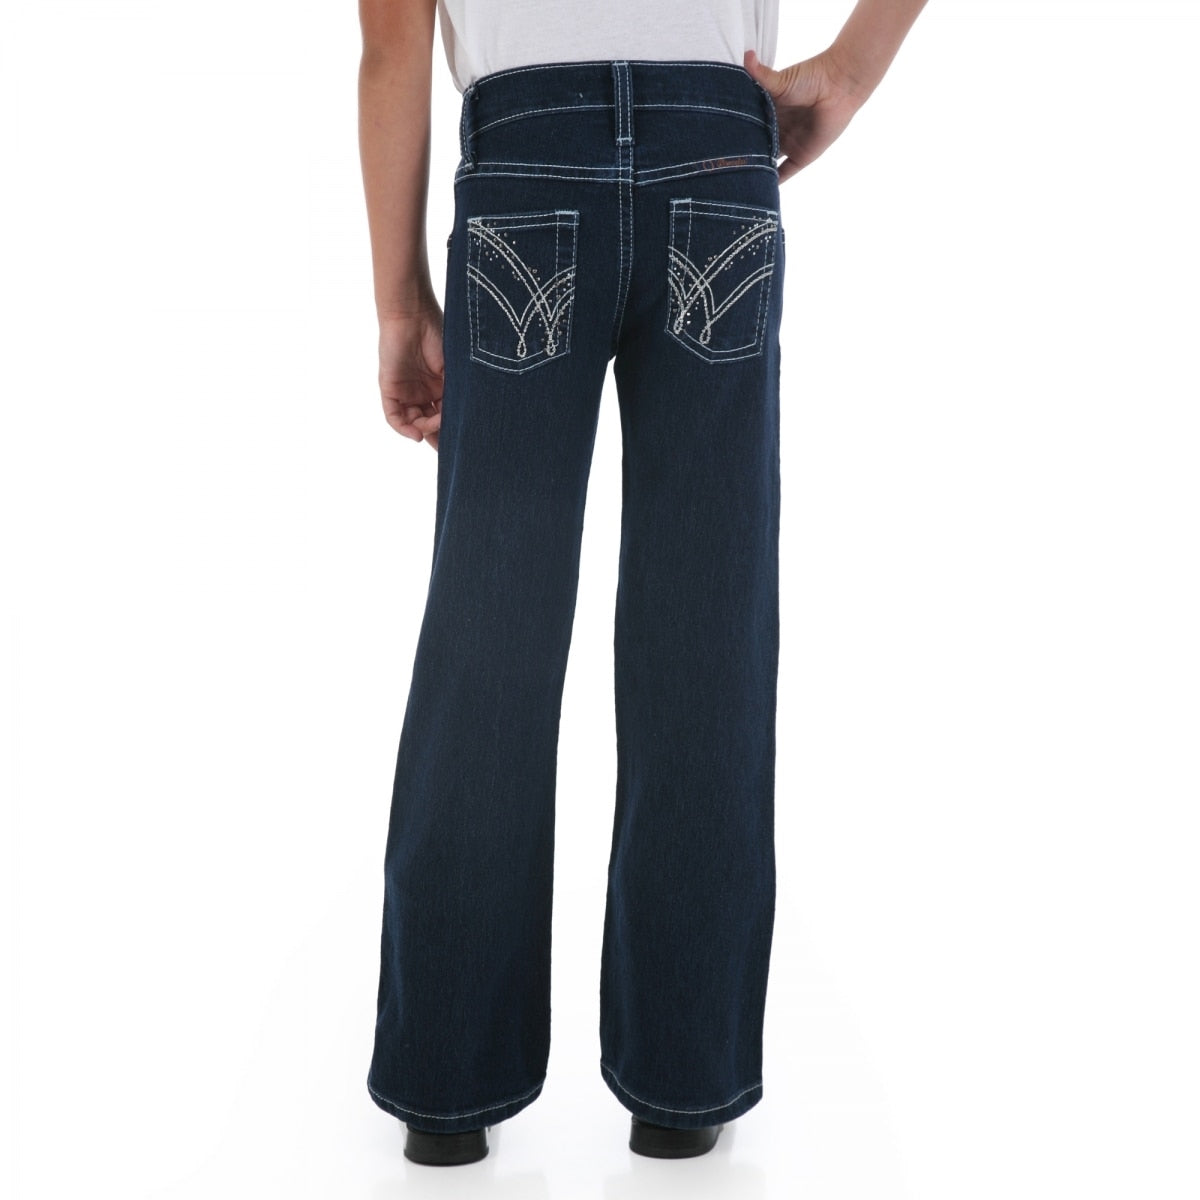 The Ultimate Riding Wrangler  Q-Baby Girls Jeans